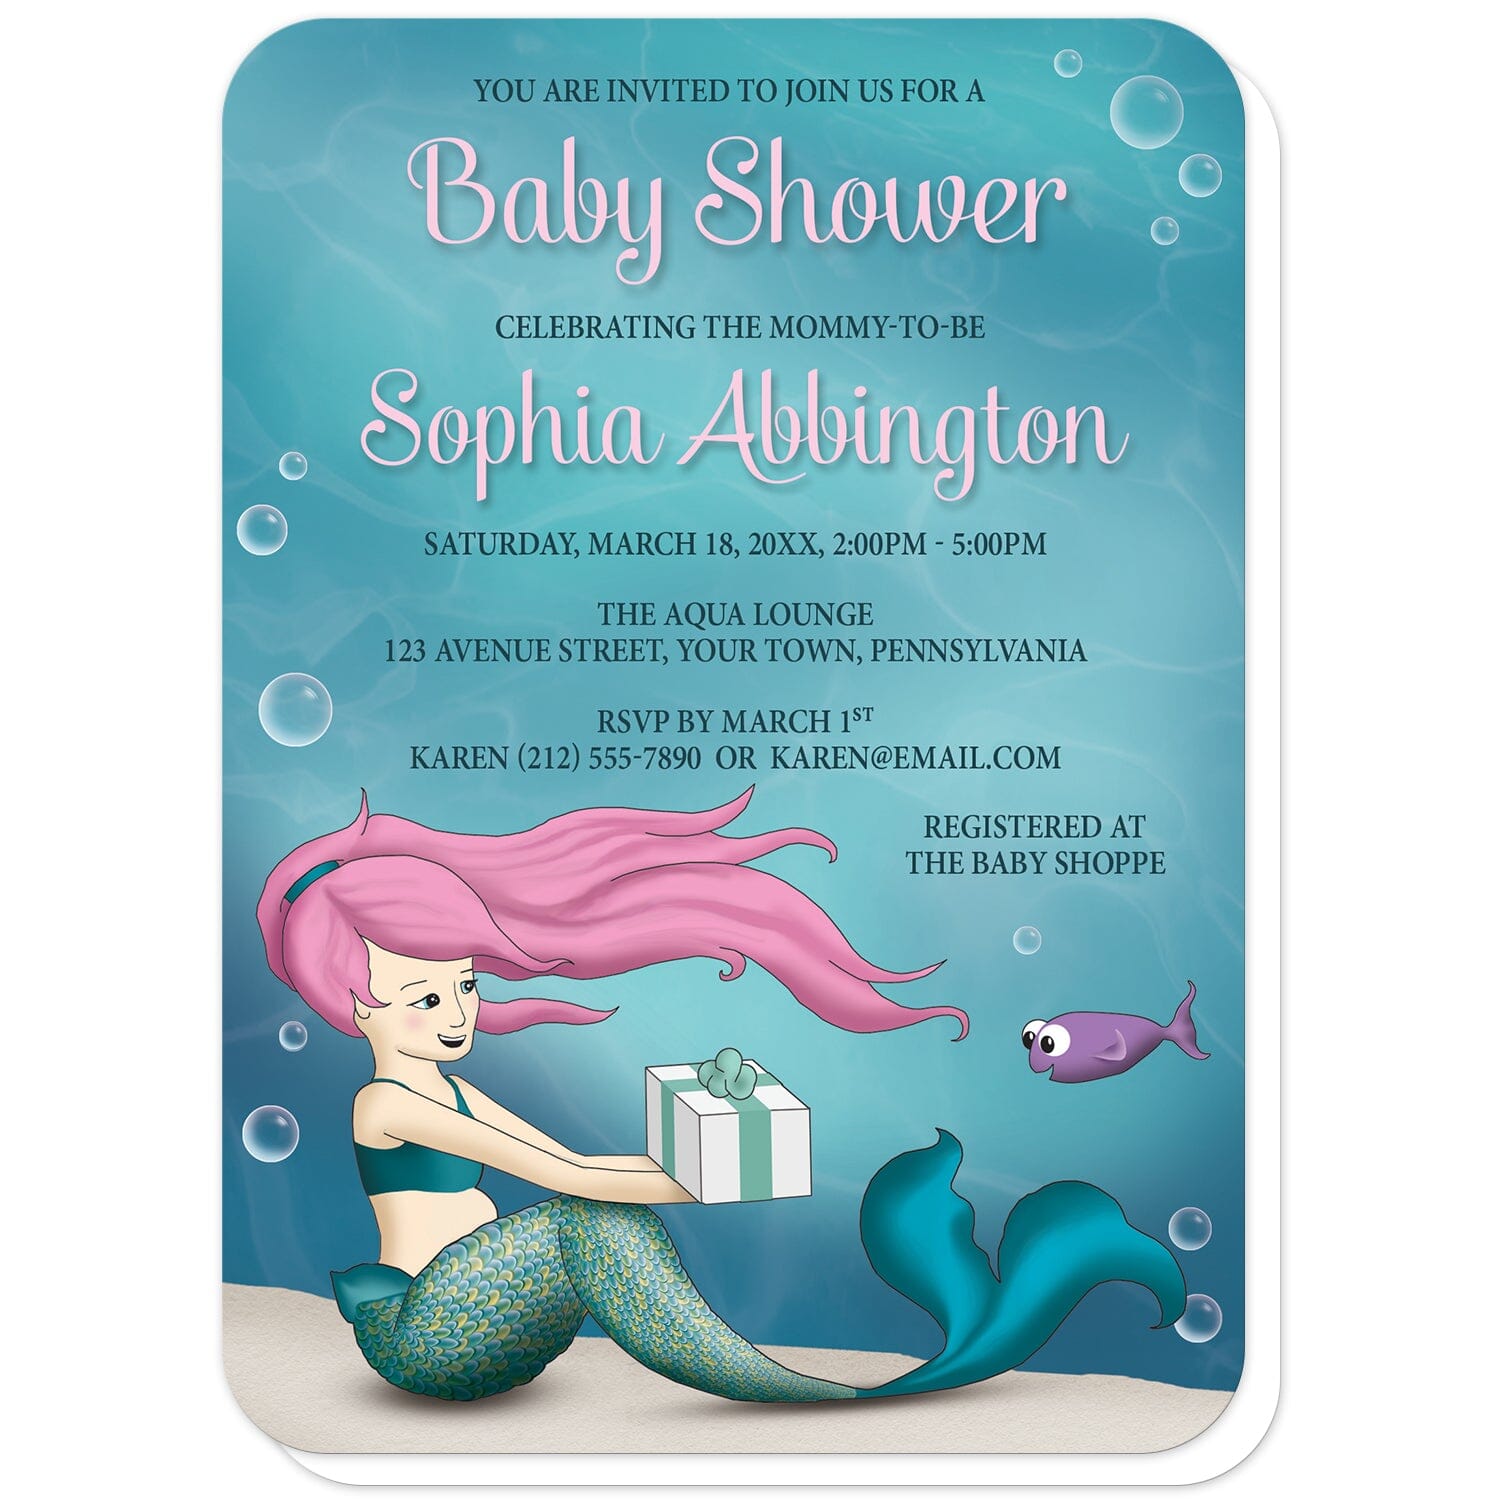 Under the Sea Mermaid Baby Shower Invitations (with rounded corners) at Artistically Invited. Uniquely illustrated under the sea mermaid baby shower invitations with an expecting mermaid with pink hair receiving a gift from a happy little purple fish. This underwater illustration has an aqua blue water background sprinkled with whimsical bubbles. Your personalized baby shower celebration details are custom printed in pink and dark blue over the underwater design.